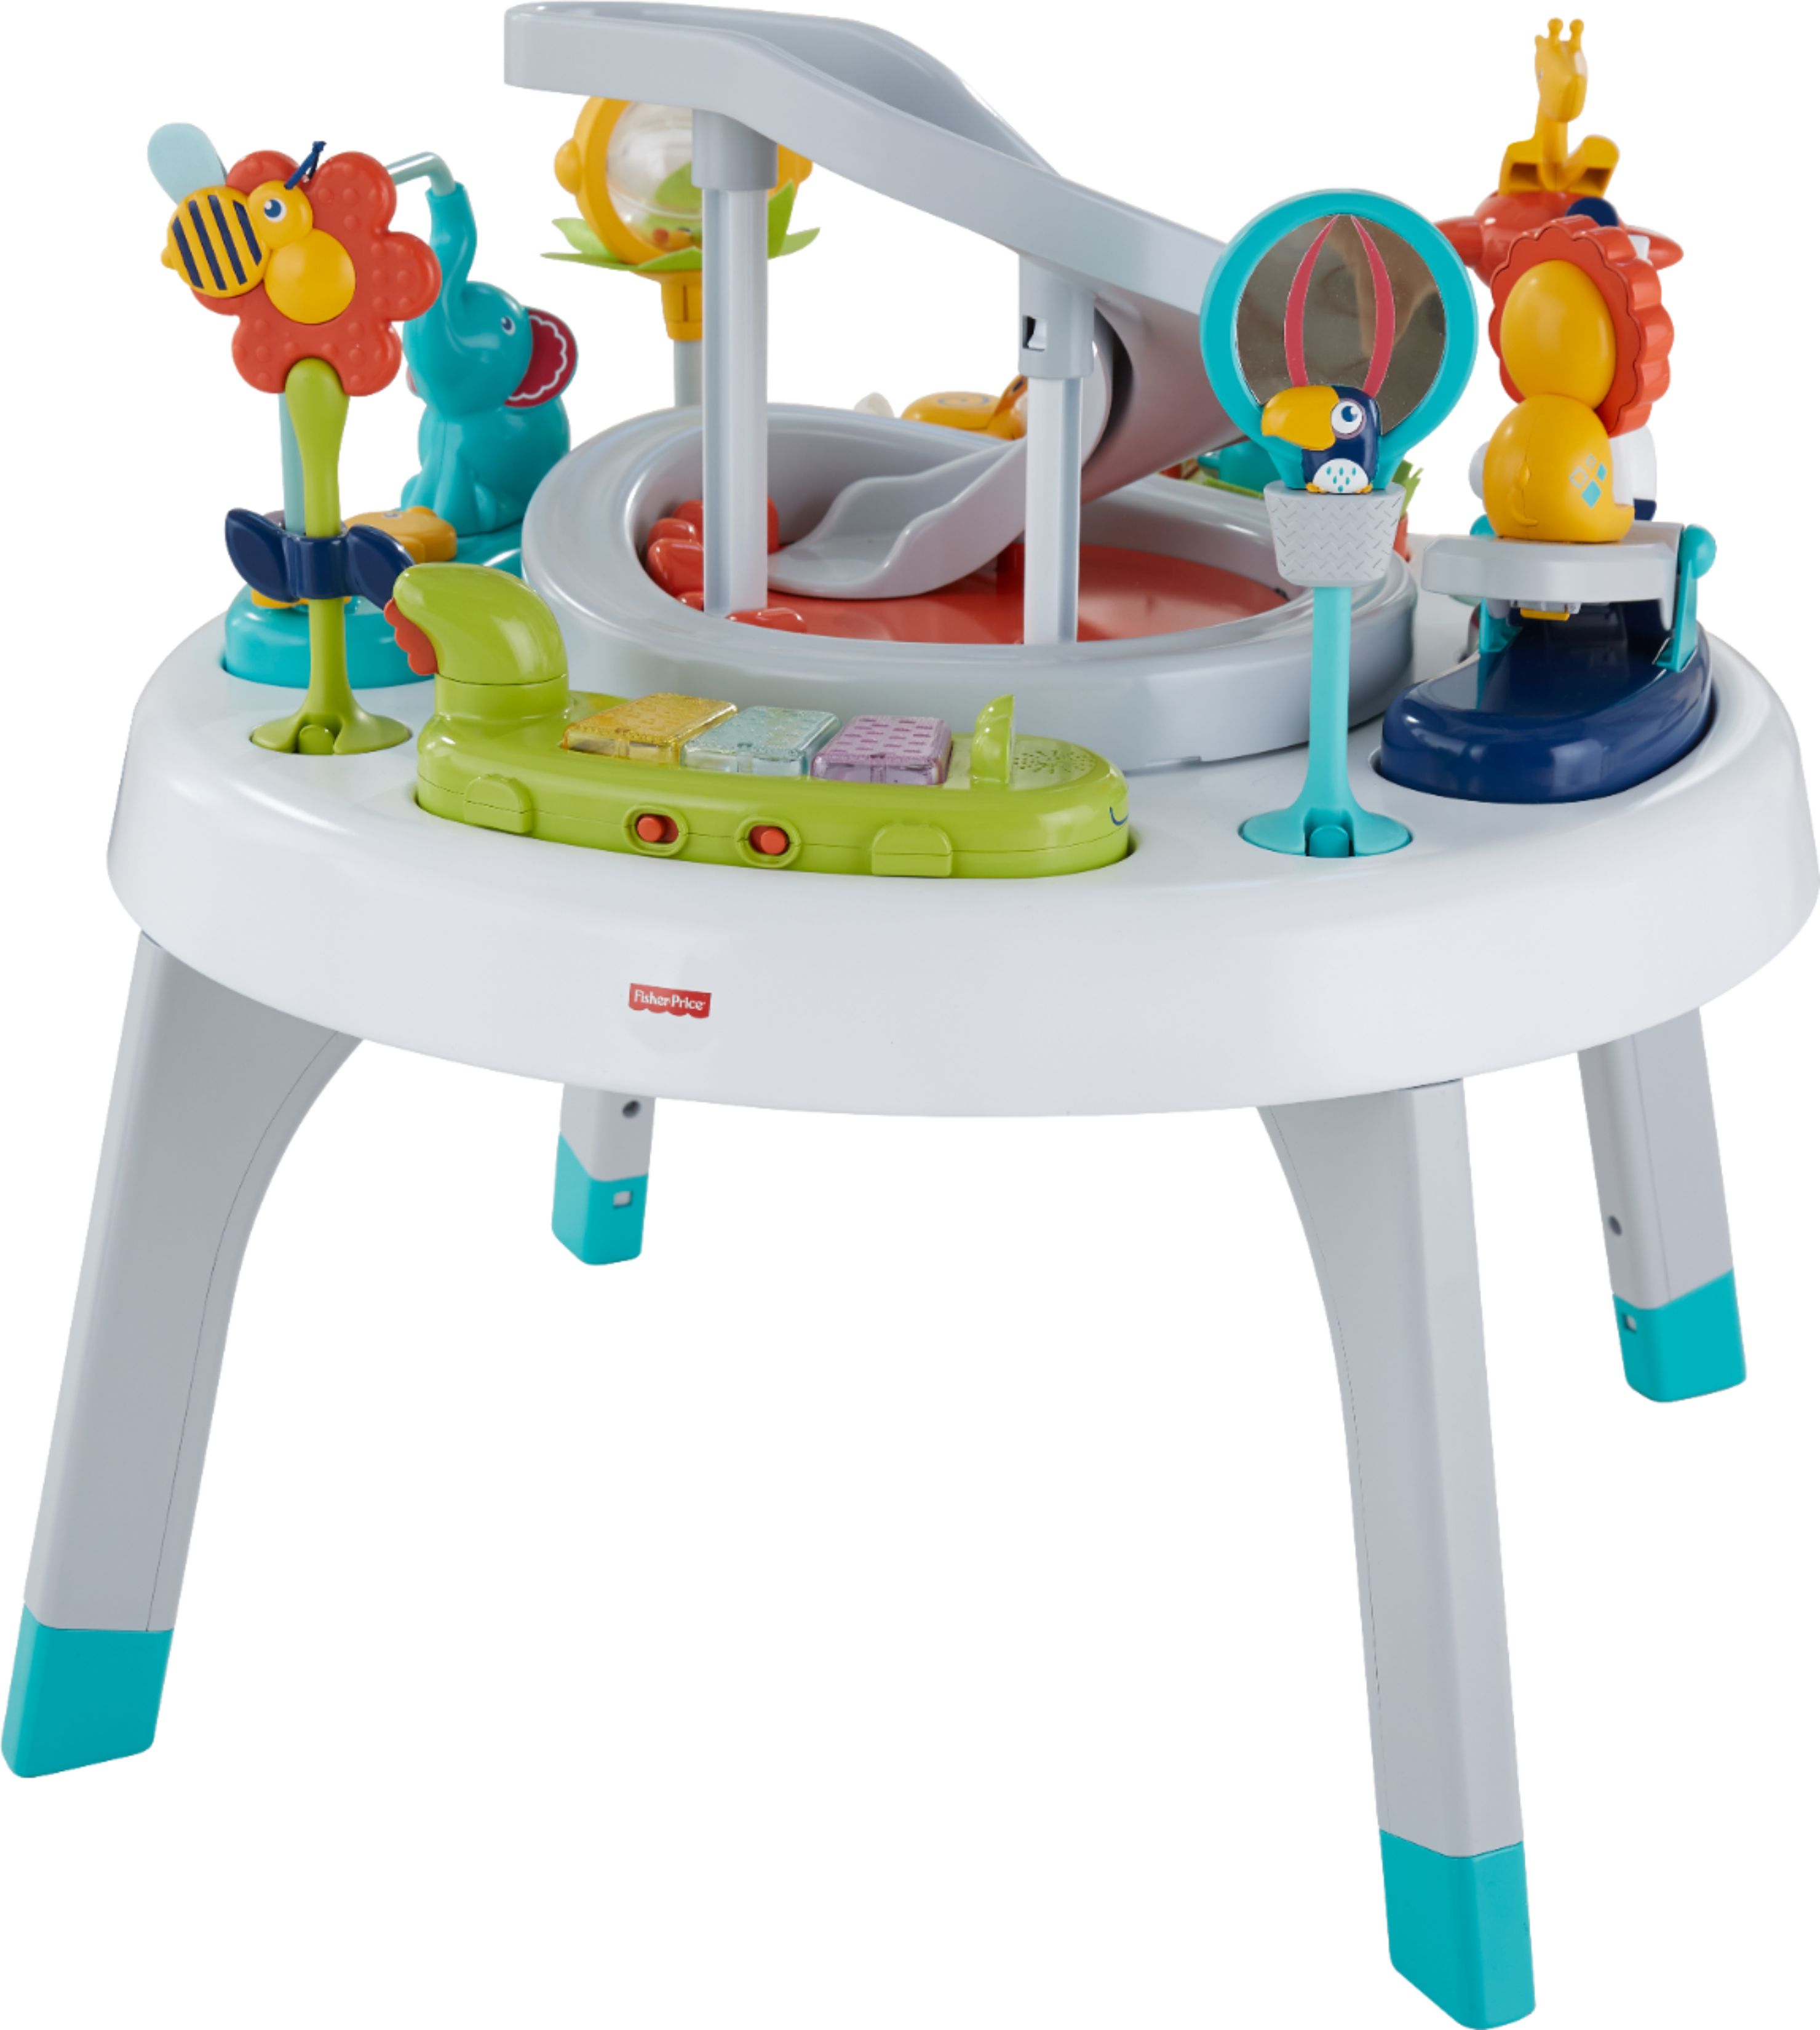 2 in 1 sit to stand activity center